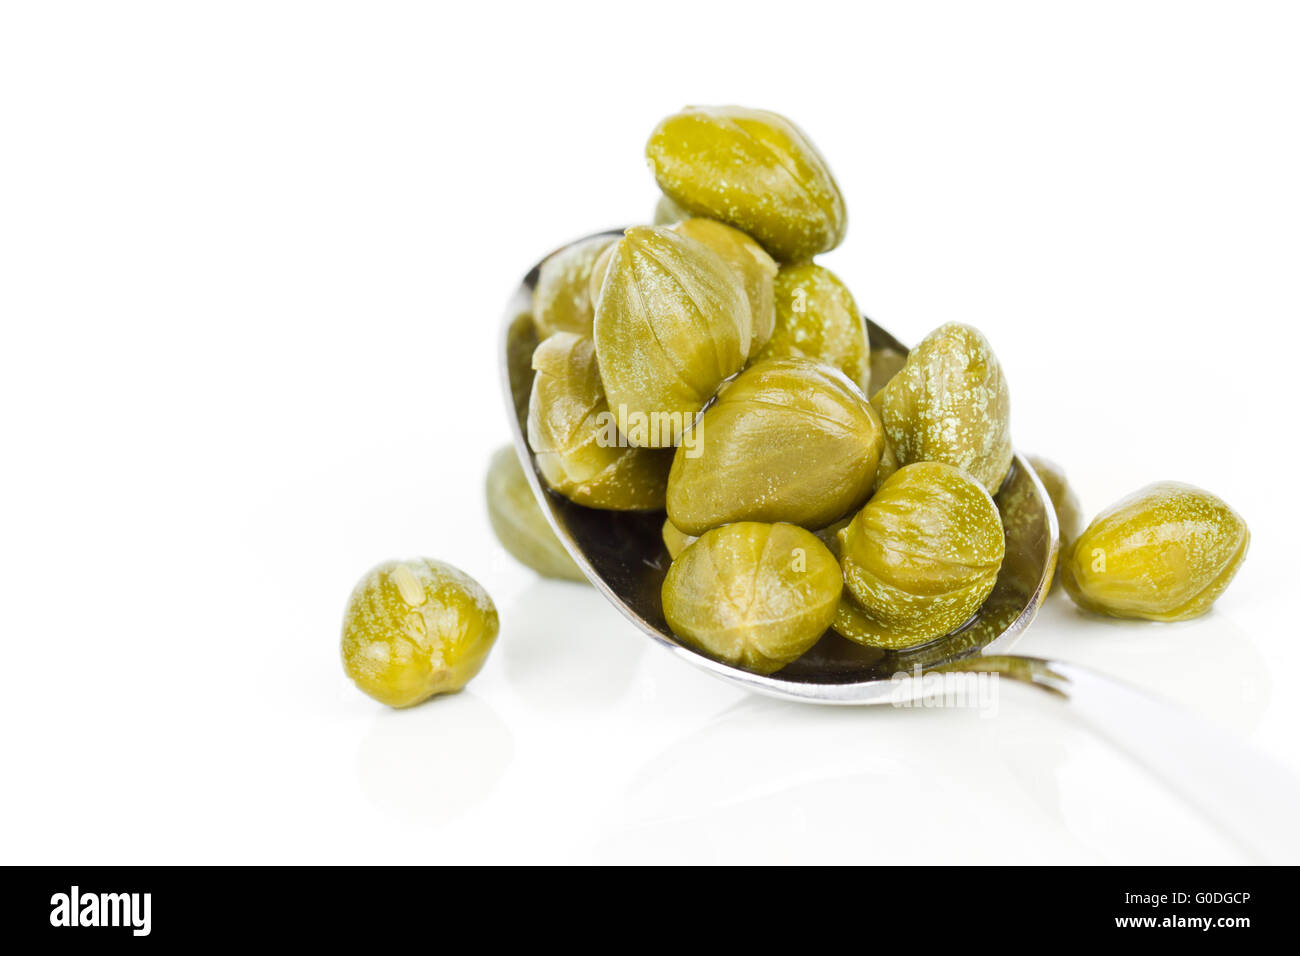 capers Stock Photo